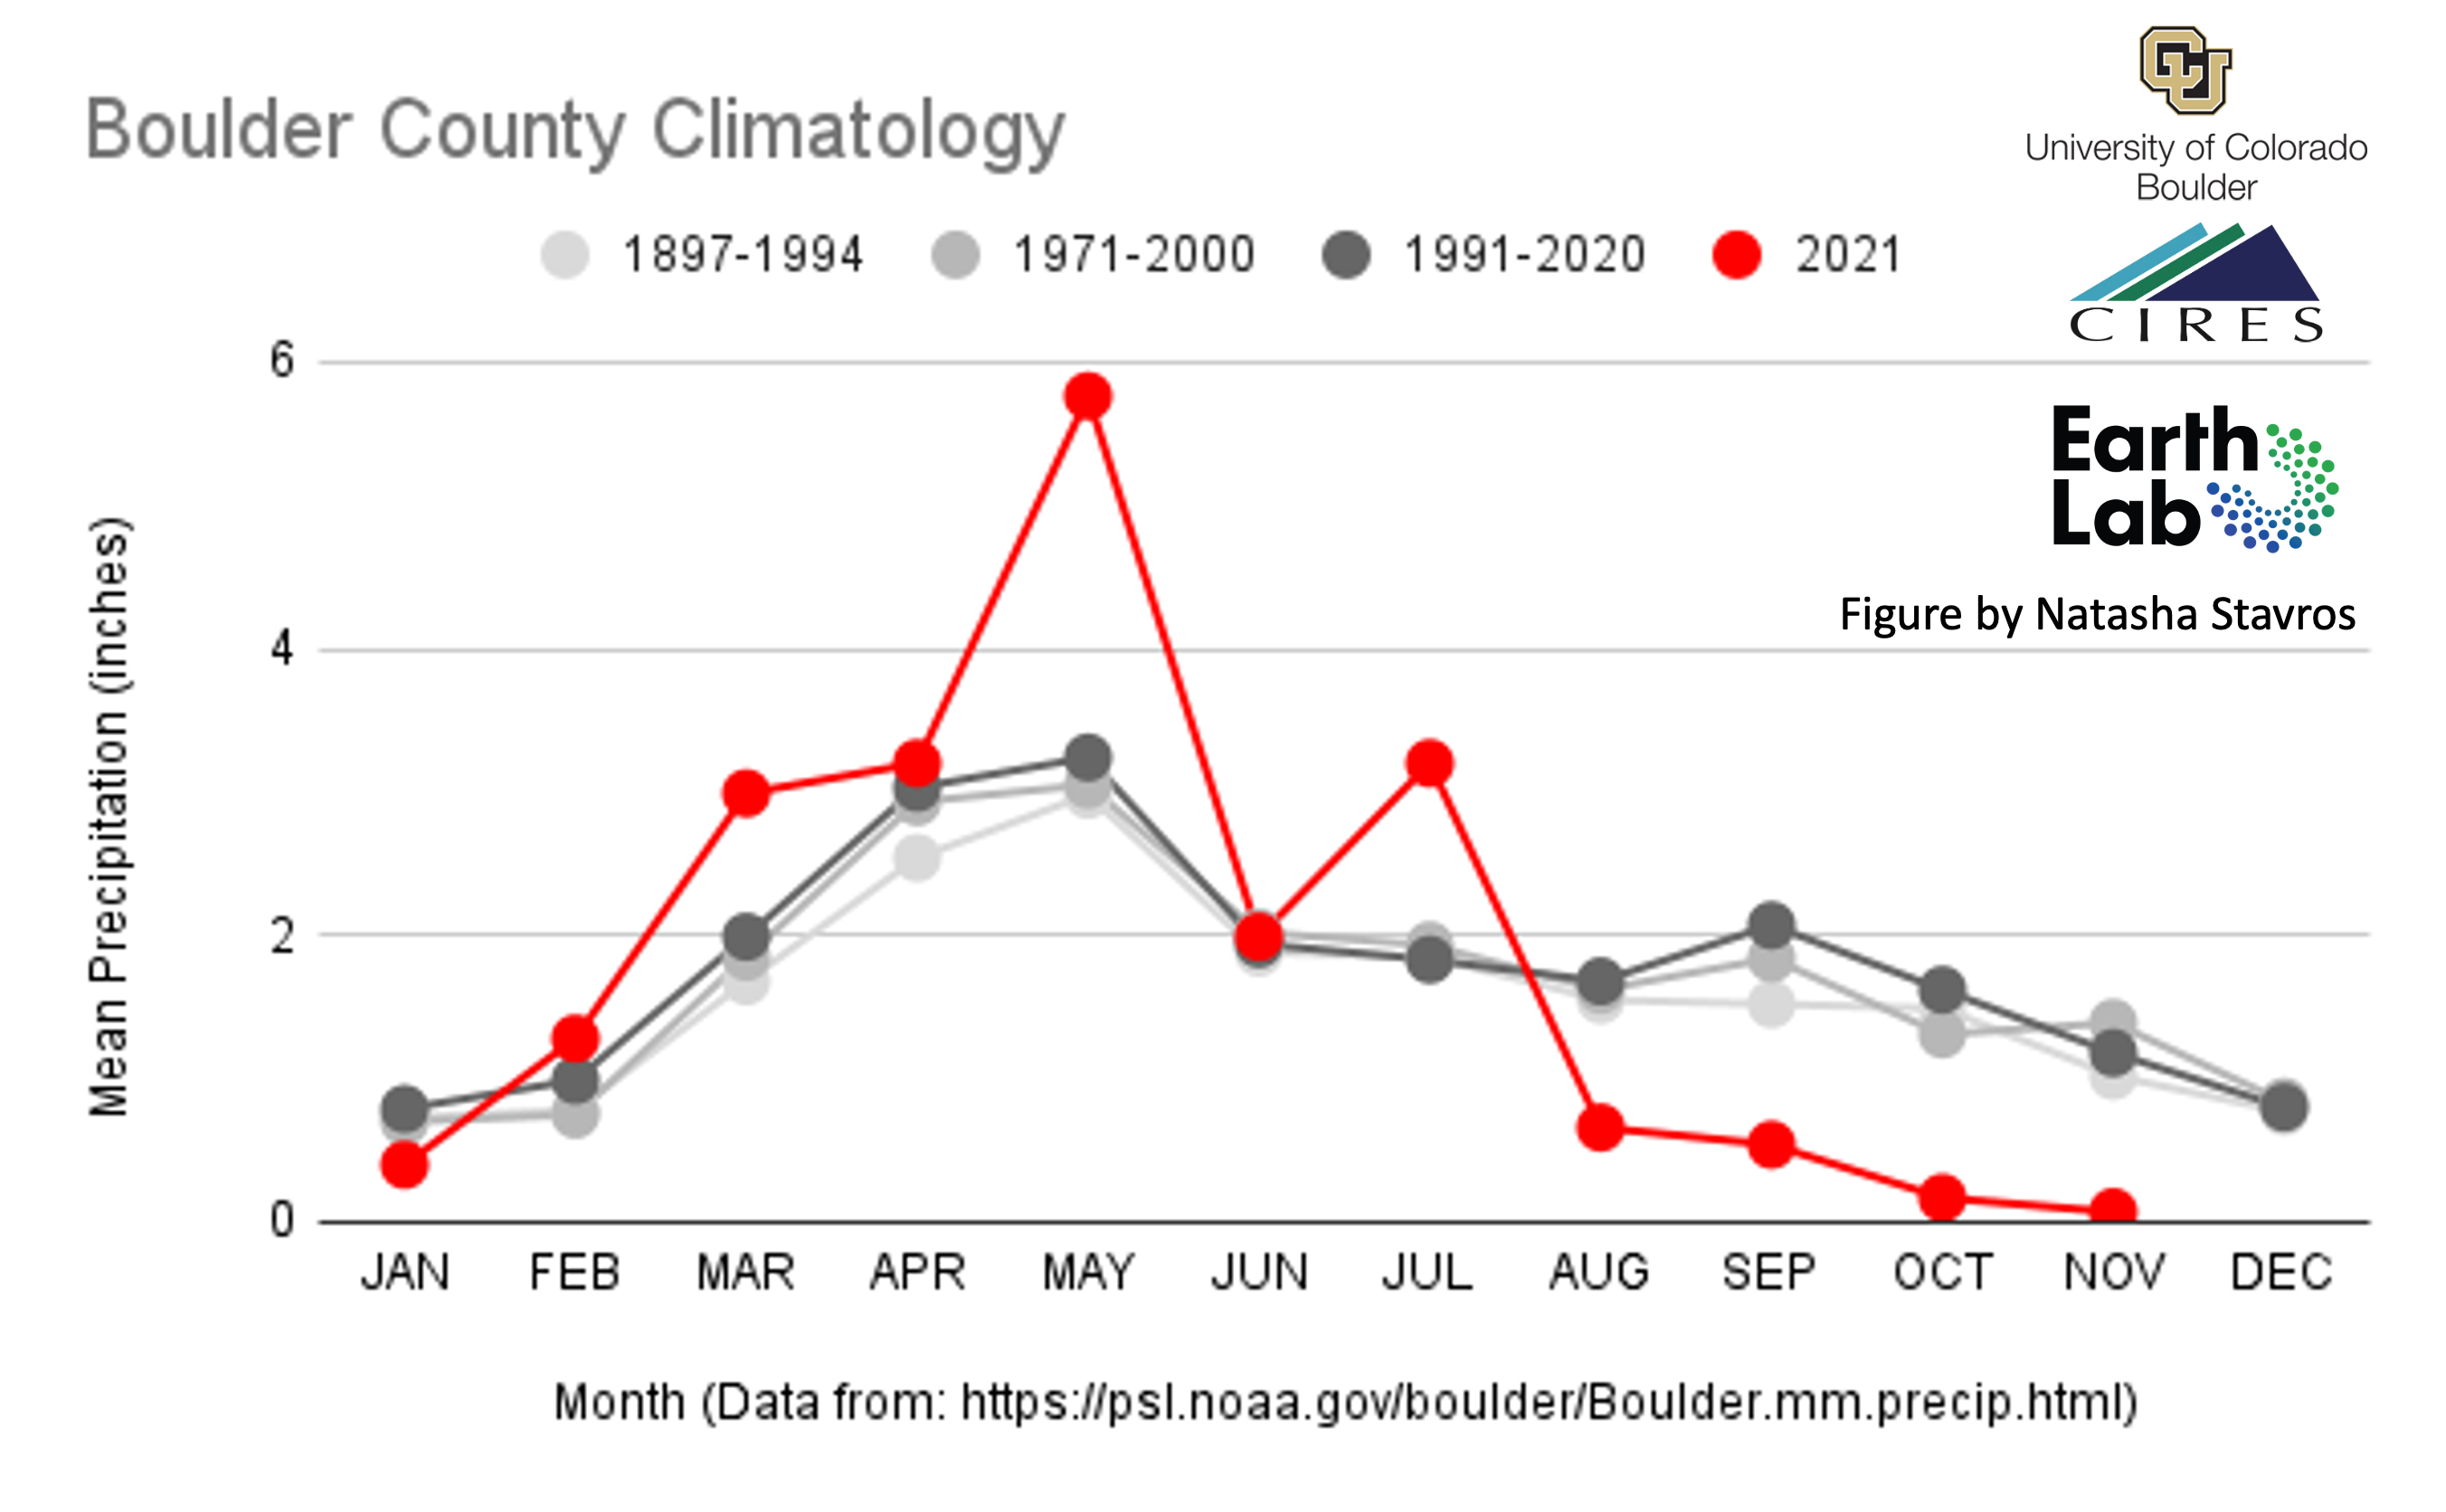 Boulder County Rain 2021 compared to historical averages